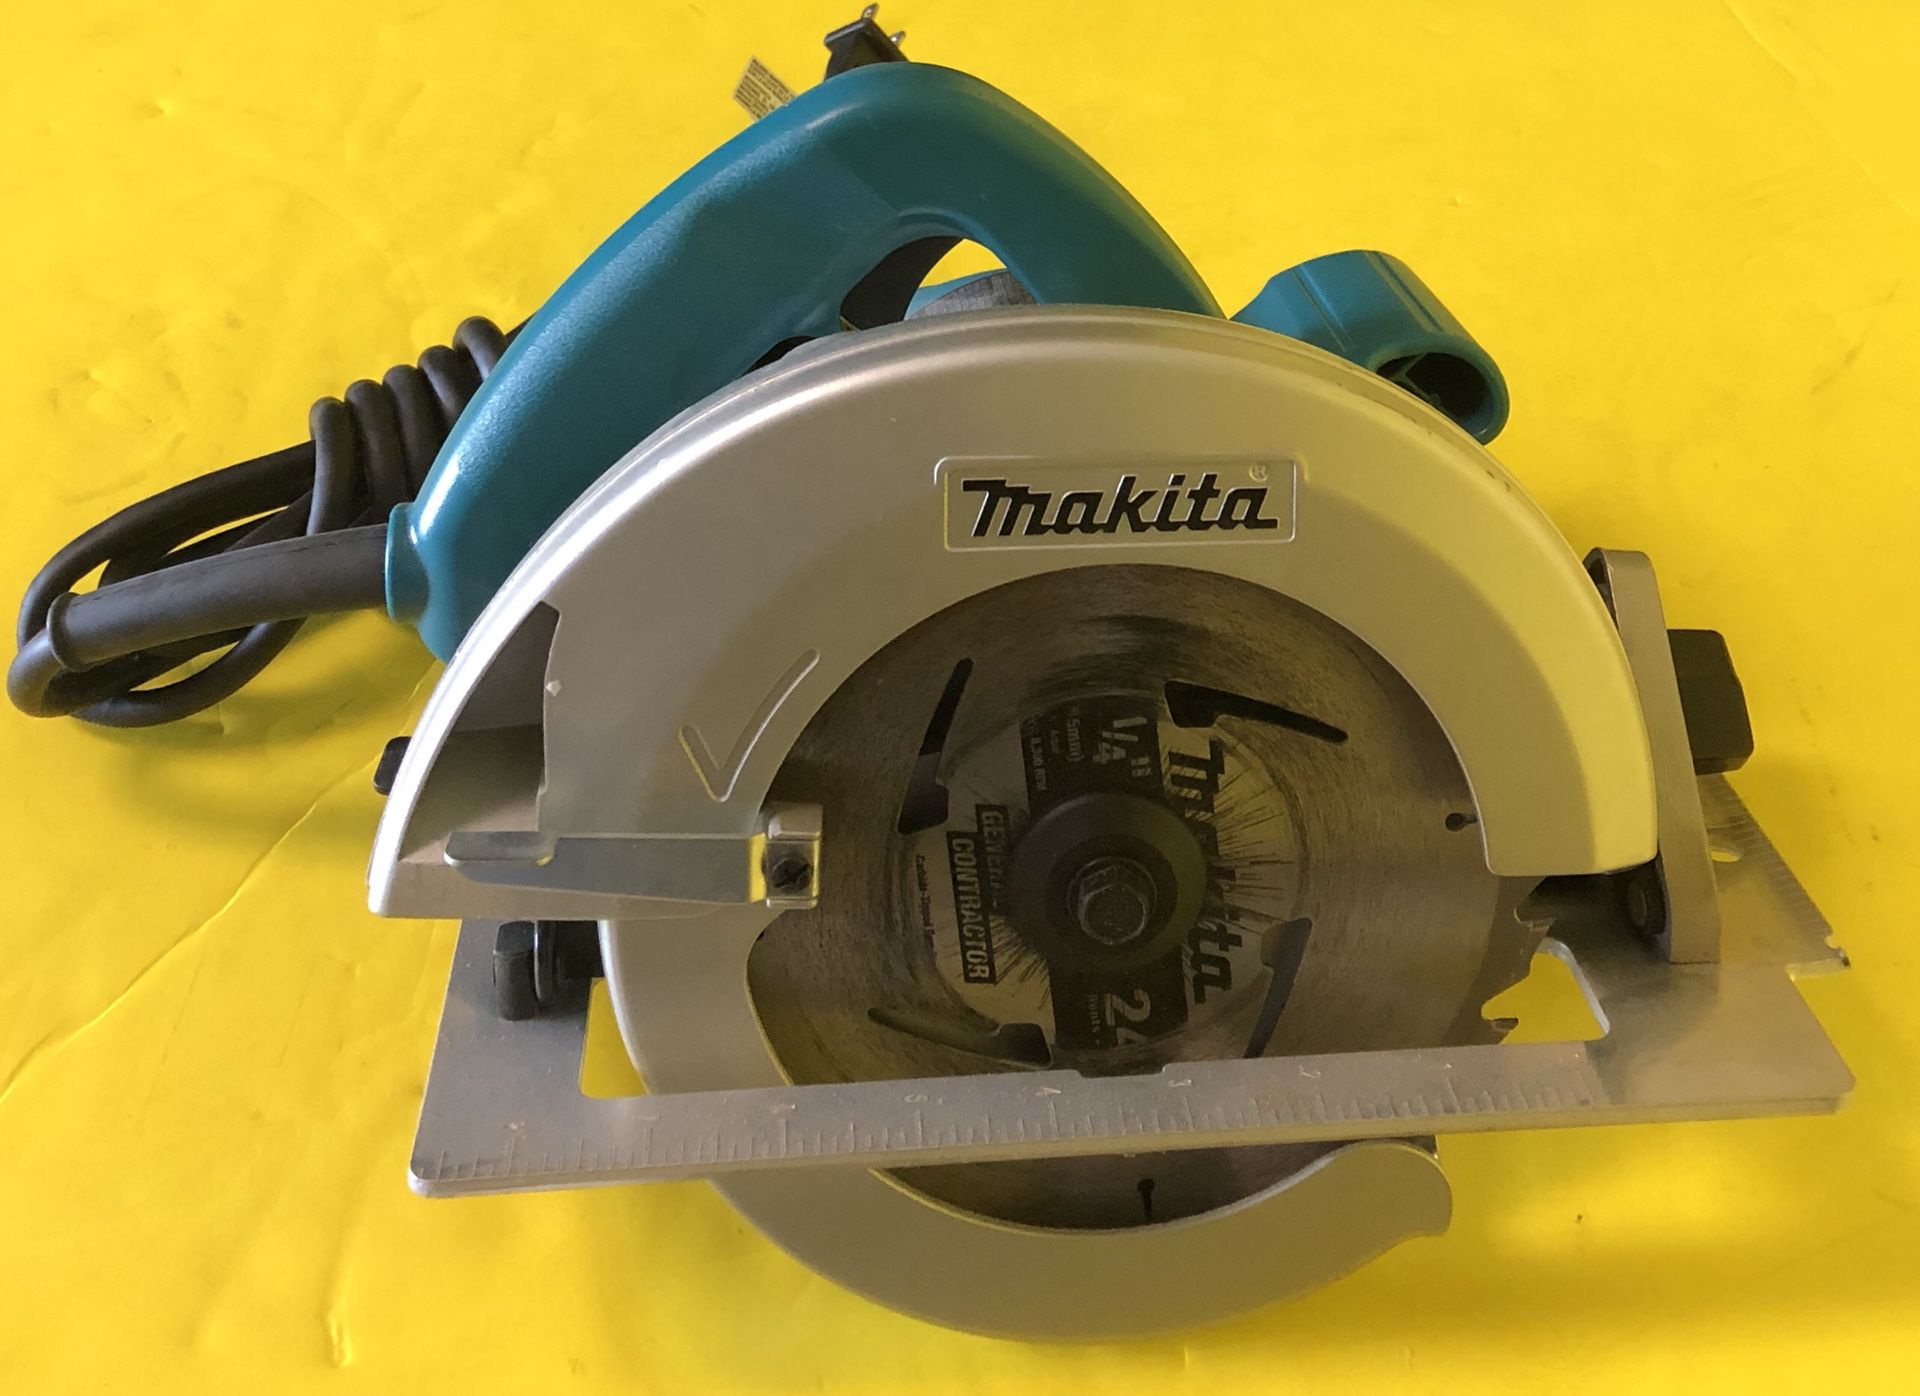 Makita 5007F - 15 Amp 7-1/4 In Corded Circular Saw - LIKE NEW CONDITION